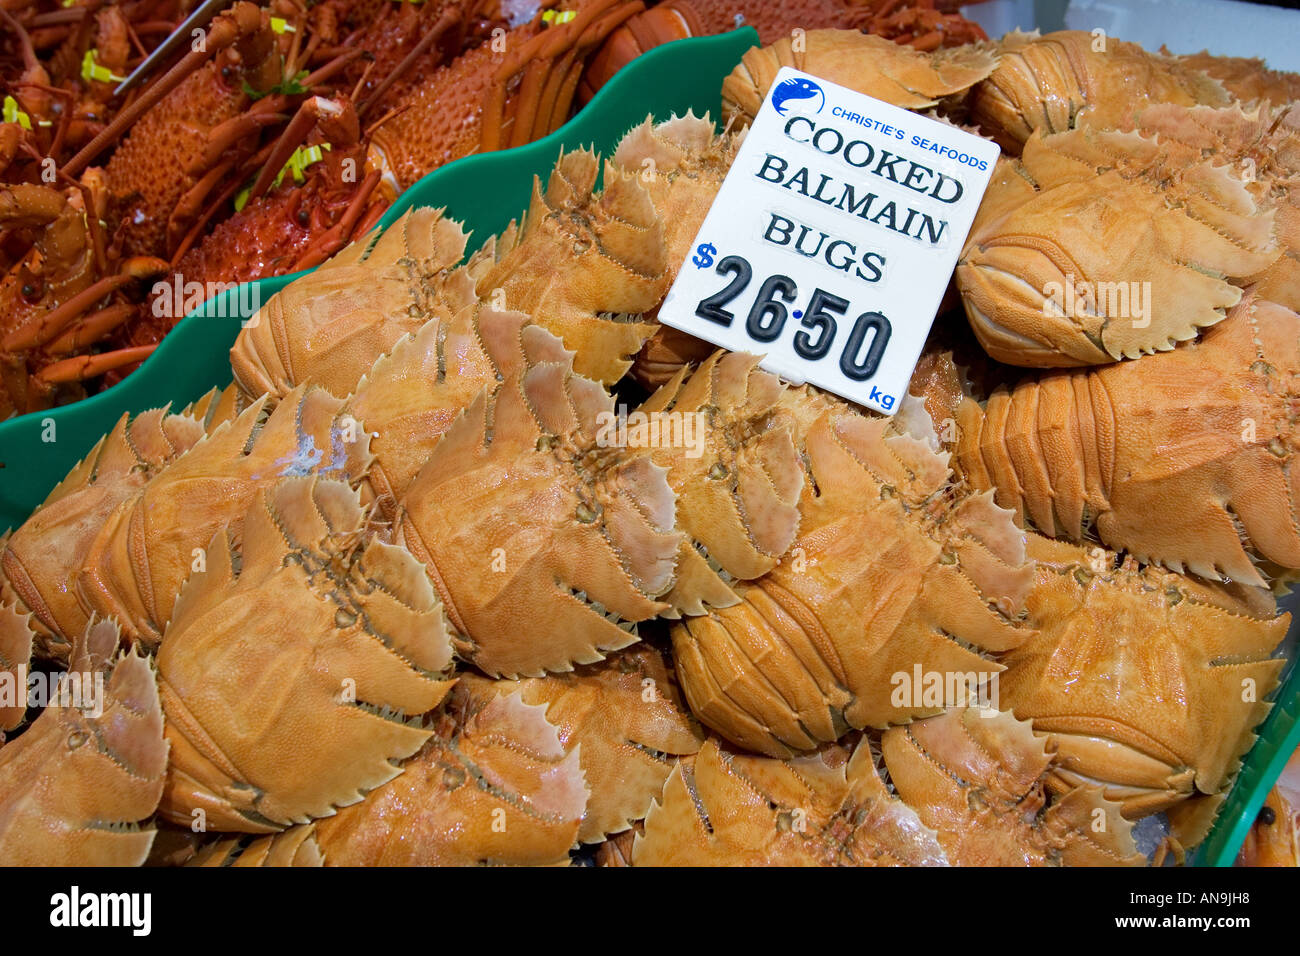 Cooked Balmain Bugs for sale at Sydney Fish Market Darling Harbour ...